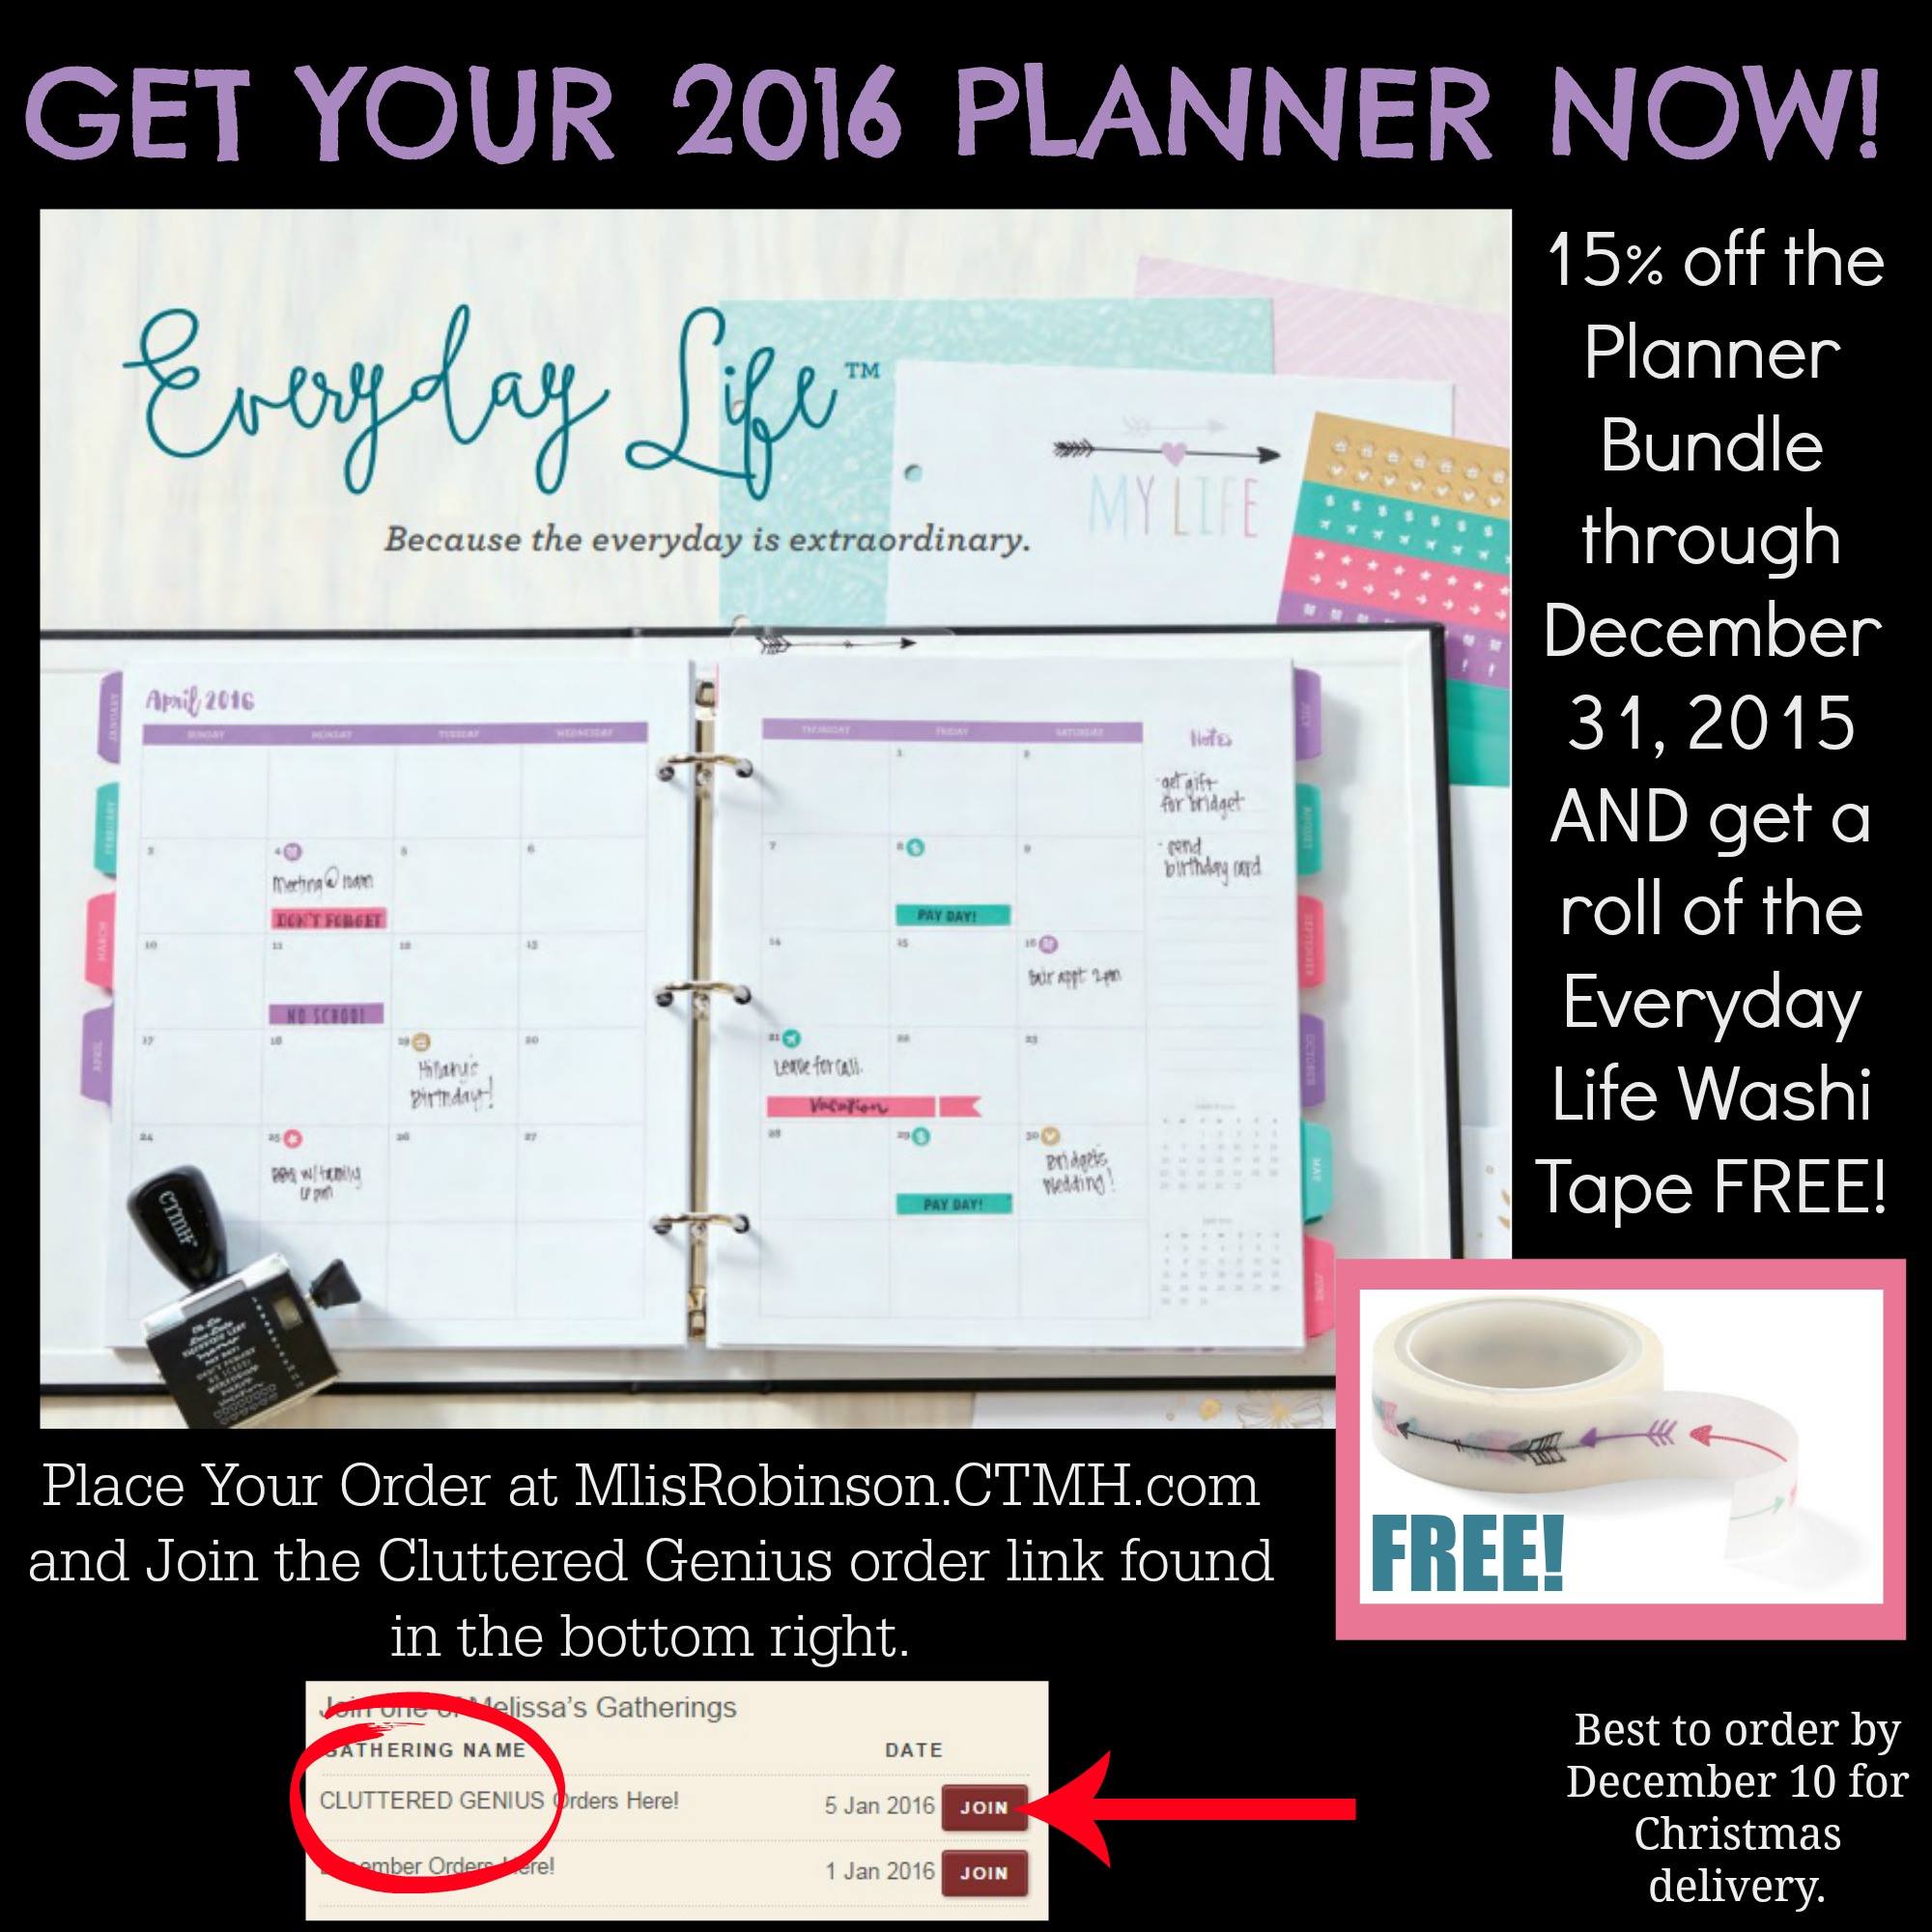 Why I love my Close to My Heart Planner!